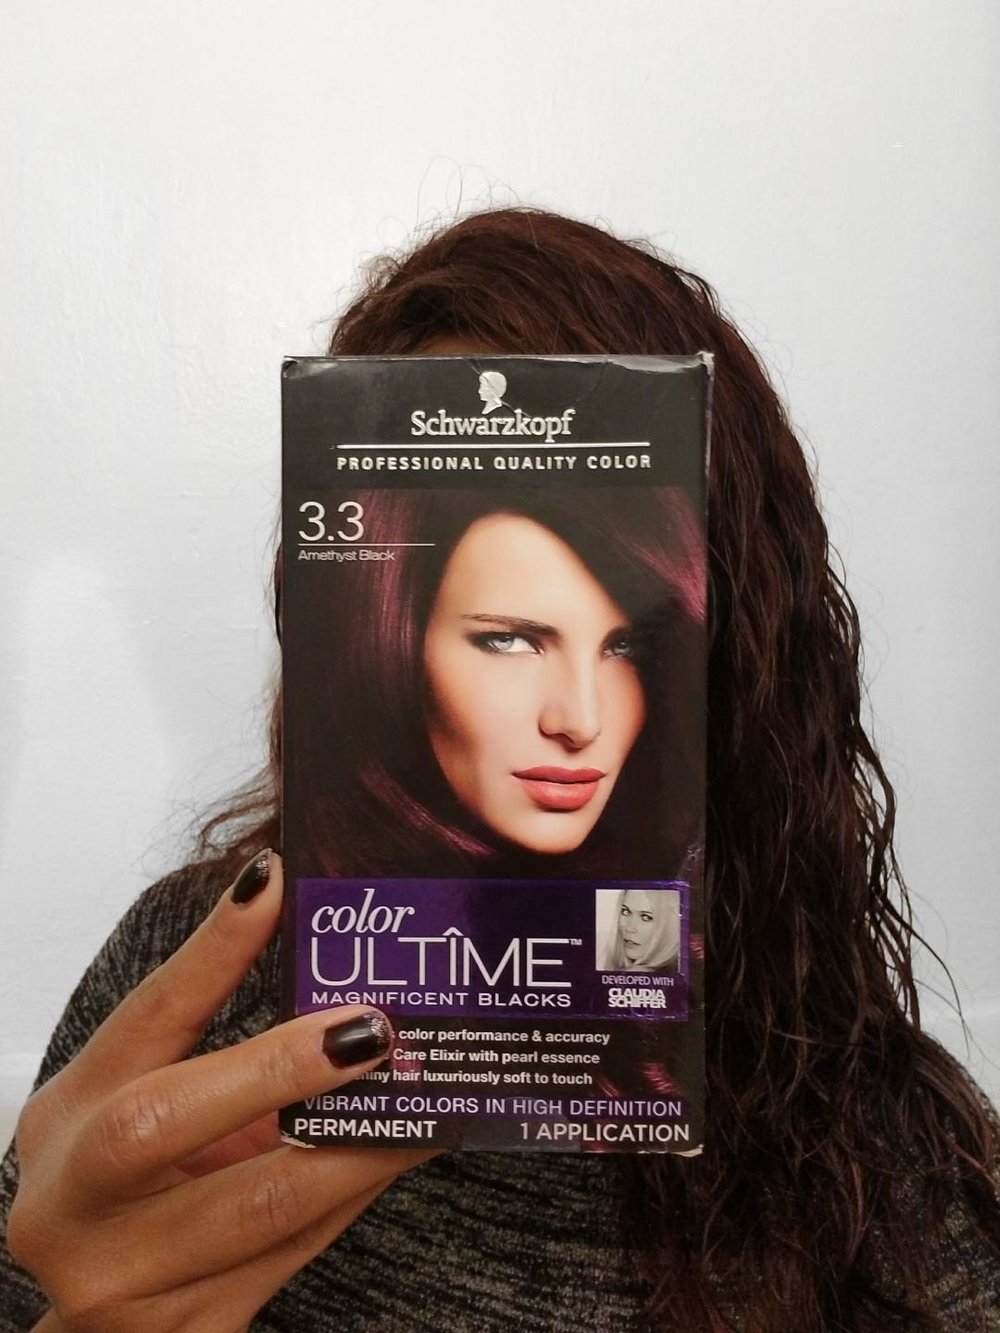 How to DIY Your Hair Color with Schwarzkopf Color Ultime! — Malikah Kelly